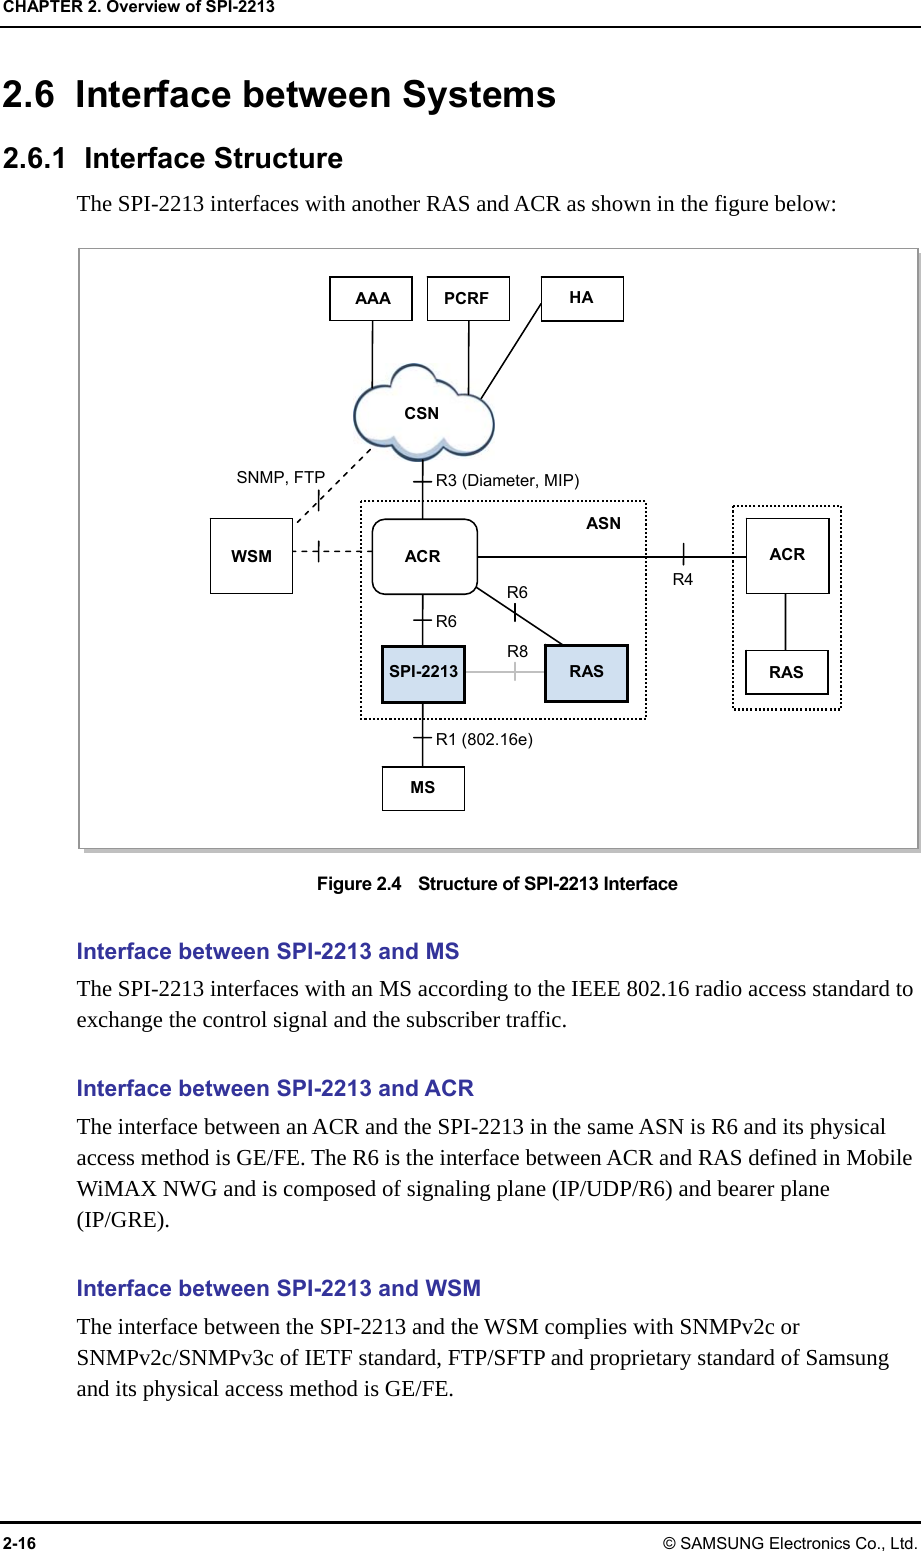 CHAPTER 2. Overview of SPI-2213 2-16 © SAMSUNG Electronics Co., Ltd. 2.6 Interface between Systems 2.6.1 Interface Structure The SPI-2213 interfaces with another RAS and ACR as shown in the figure below:  Figure 2.4    Structure of SPI-2213 Interface  Interface between SPI-2213 and MS The SPI-2213 interfaces with an MS according to the IEEE 802.16 radio access standard to exchange the control signal and the subscriber traffic.  Interface between SPI-2213 and ACR The interface between an ACR and the SPI-2213 in the same ASN is R6 and its physical access method is GE/FE. The R6 is the interface between ACR and RAS defined in Mobile WiMAX NWG and is composed of signaling plane (IP/UDP/R6) and bearer plane (IP/GRE).  Interface between SPI-2213 and WSM The interface between the SPI-2213 and the WSM complies with SNMPv2c or SNMPv2c/SNMPv3c of IETF standard, FTP/SFTP and proprietary standard of Samsung and its physical access method is GE/FE. CSN ACR R3 (Diameter, MIP) R6 R1 (802.16e) R4SNMP, FTP MS WSM SPI-2213 RASR6 R8 ACR RAS ASN AAA PCRF HA 